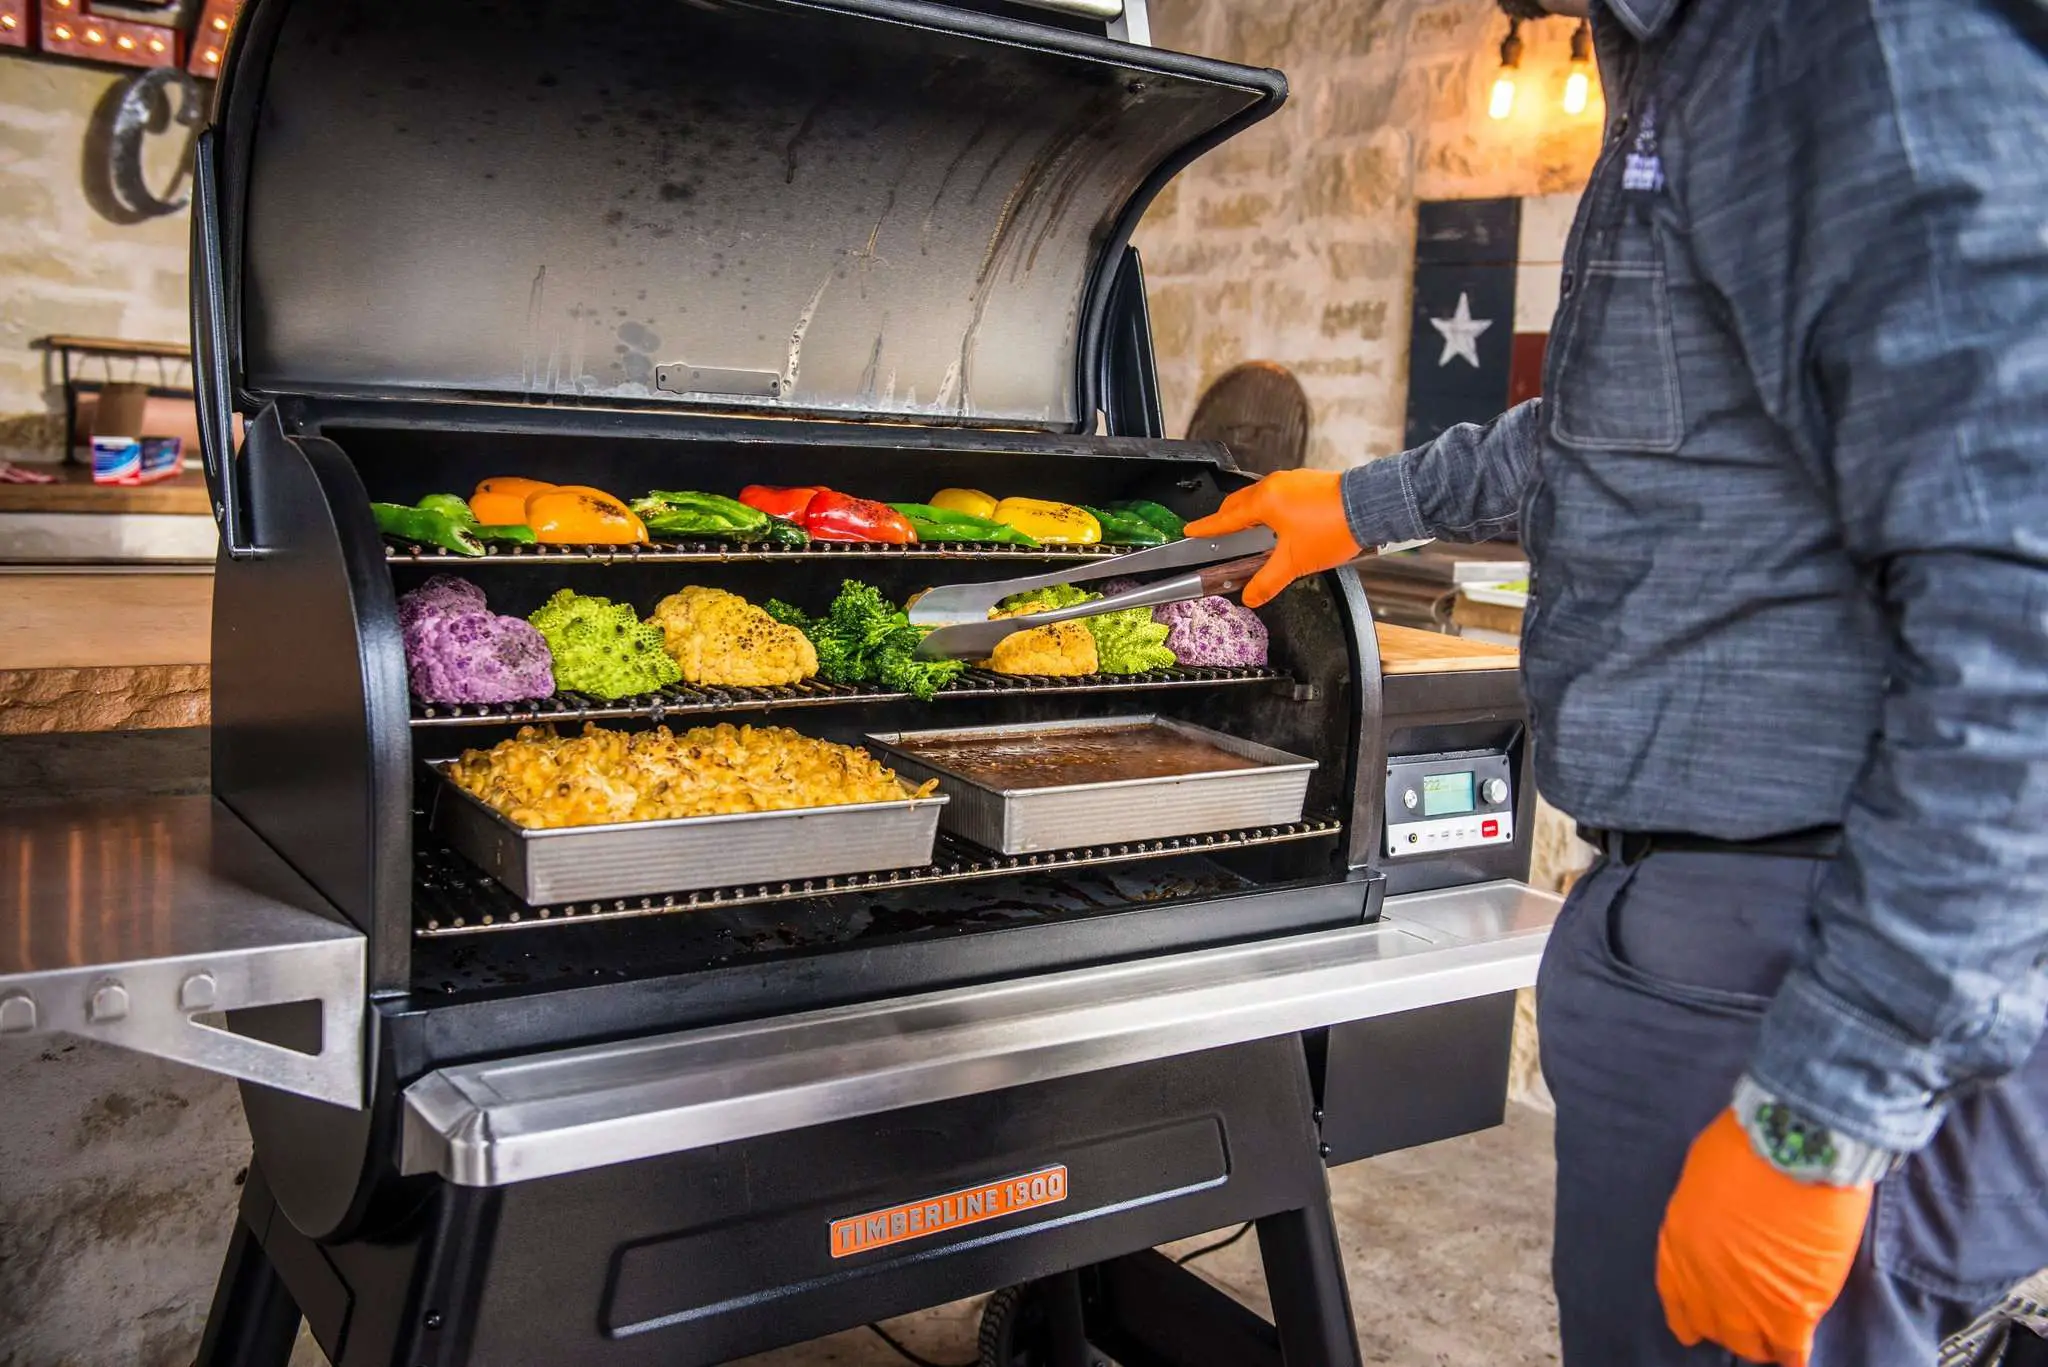 Traeger Grills on Twitter: " Hope your grill is fully loaded this ...